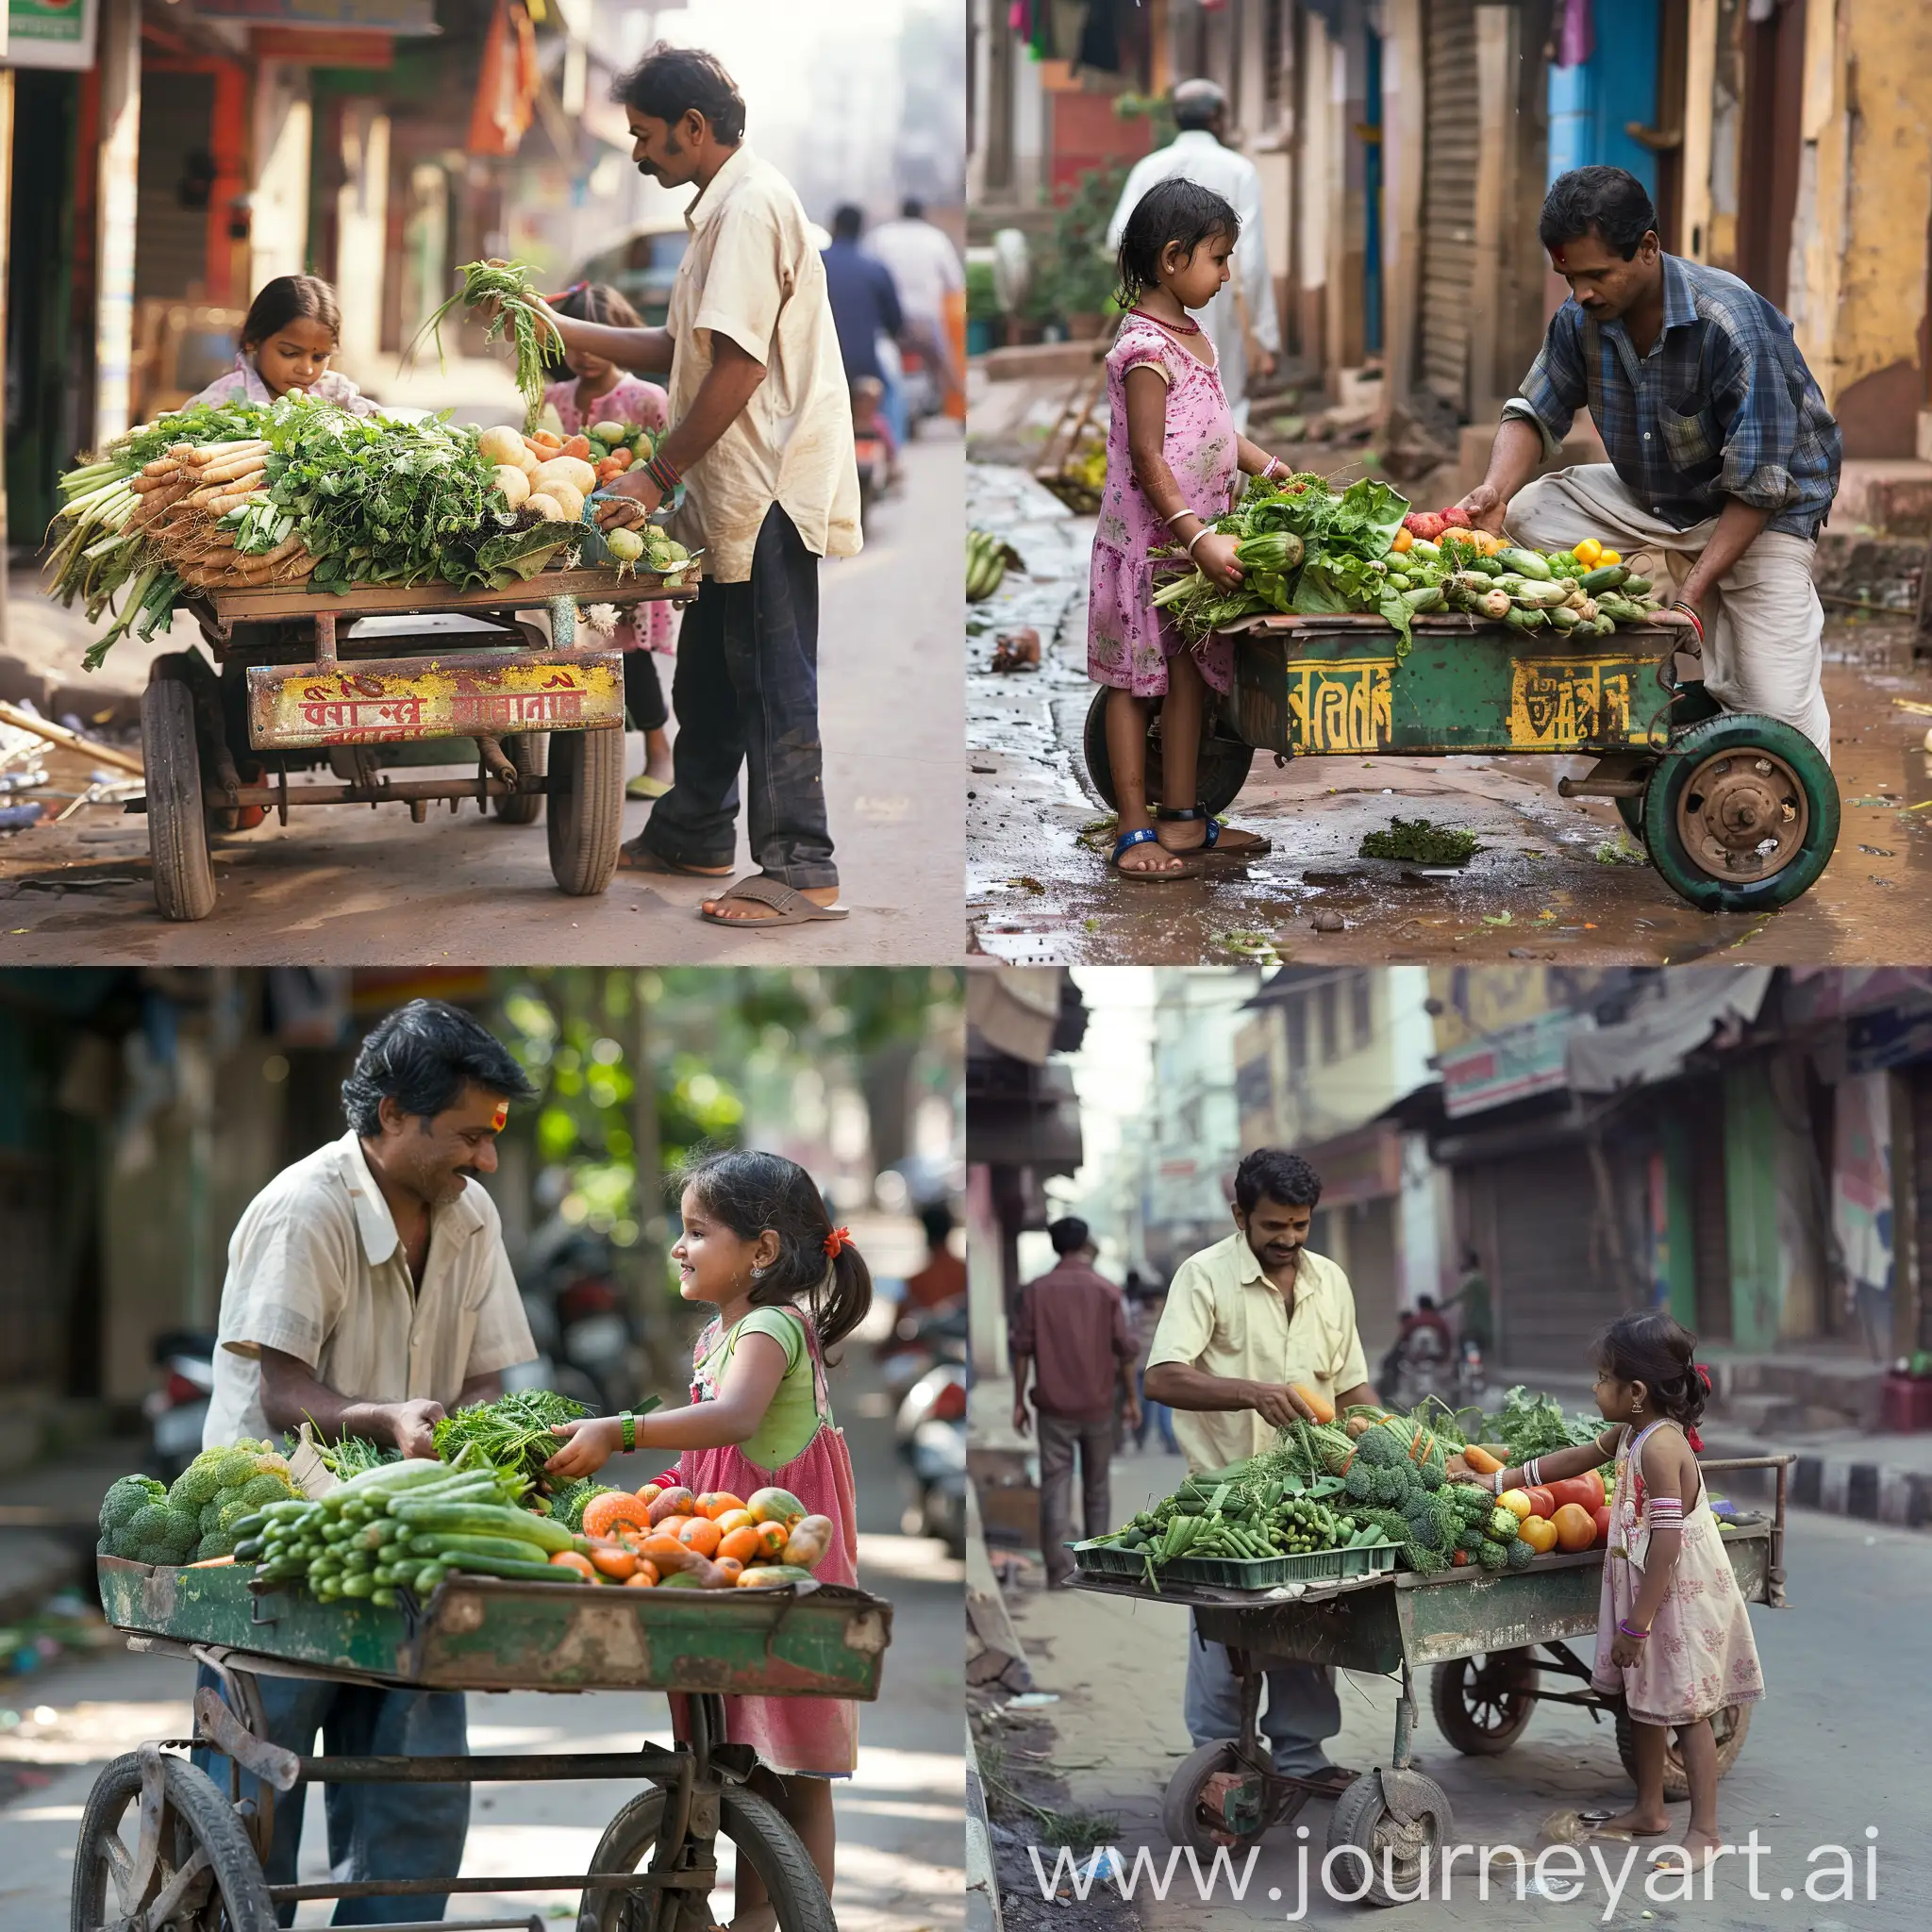 Indian girl child buying vegetables from a man on vegetables cart